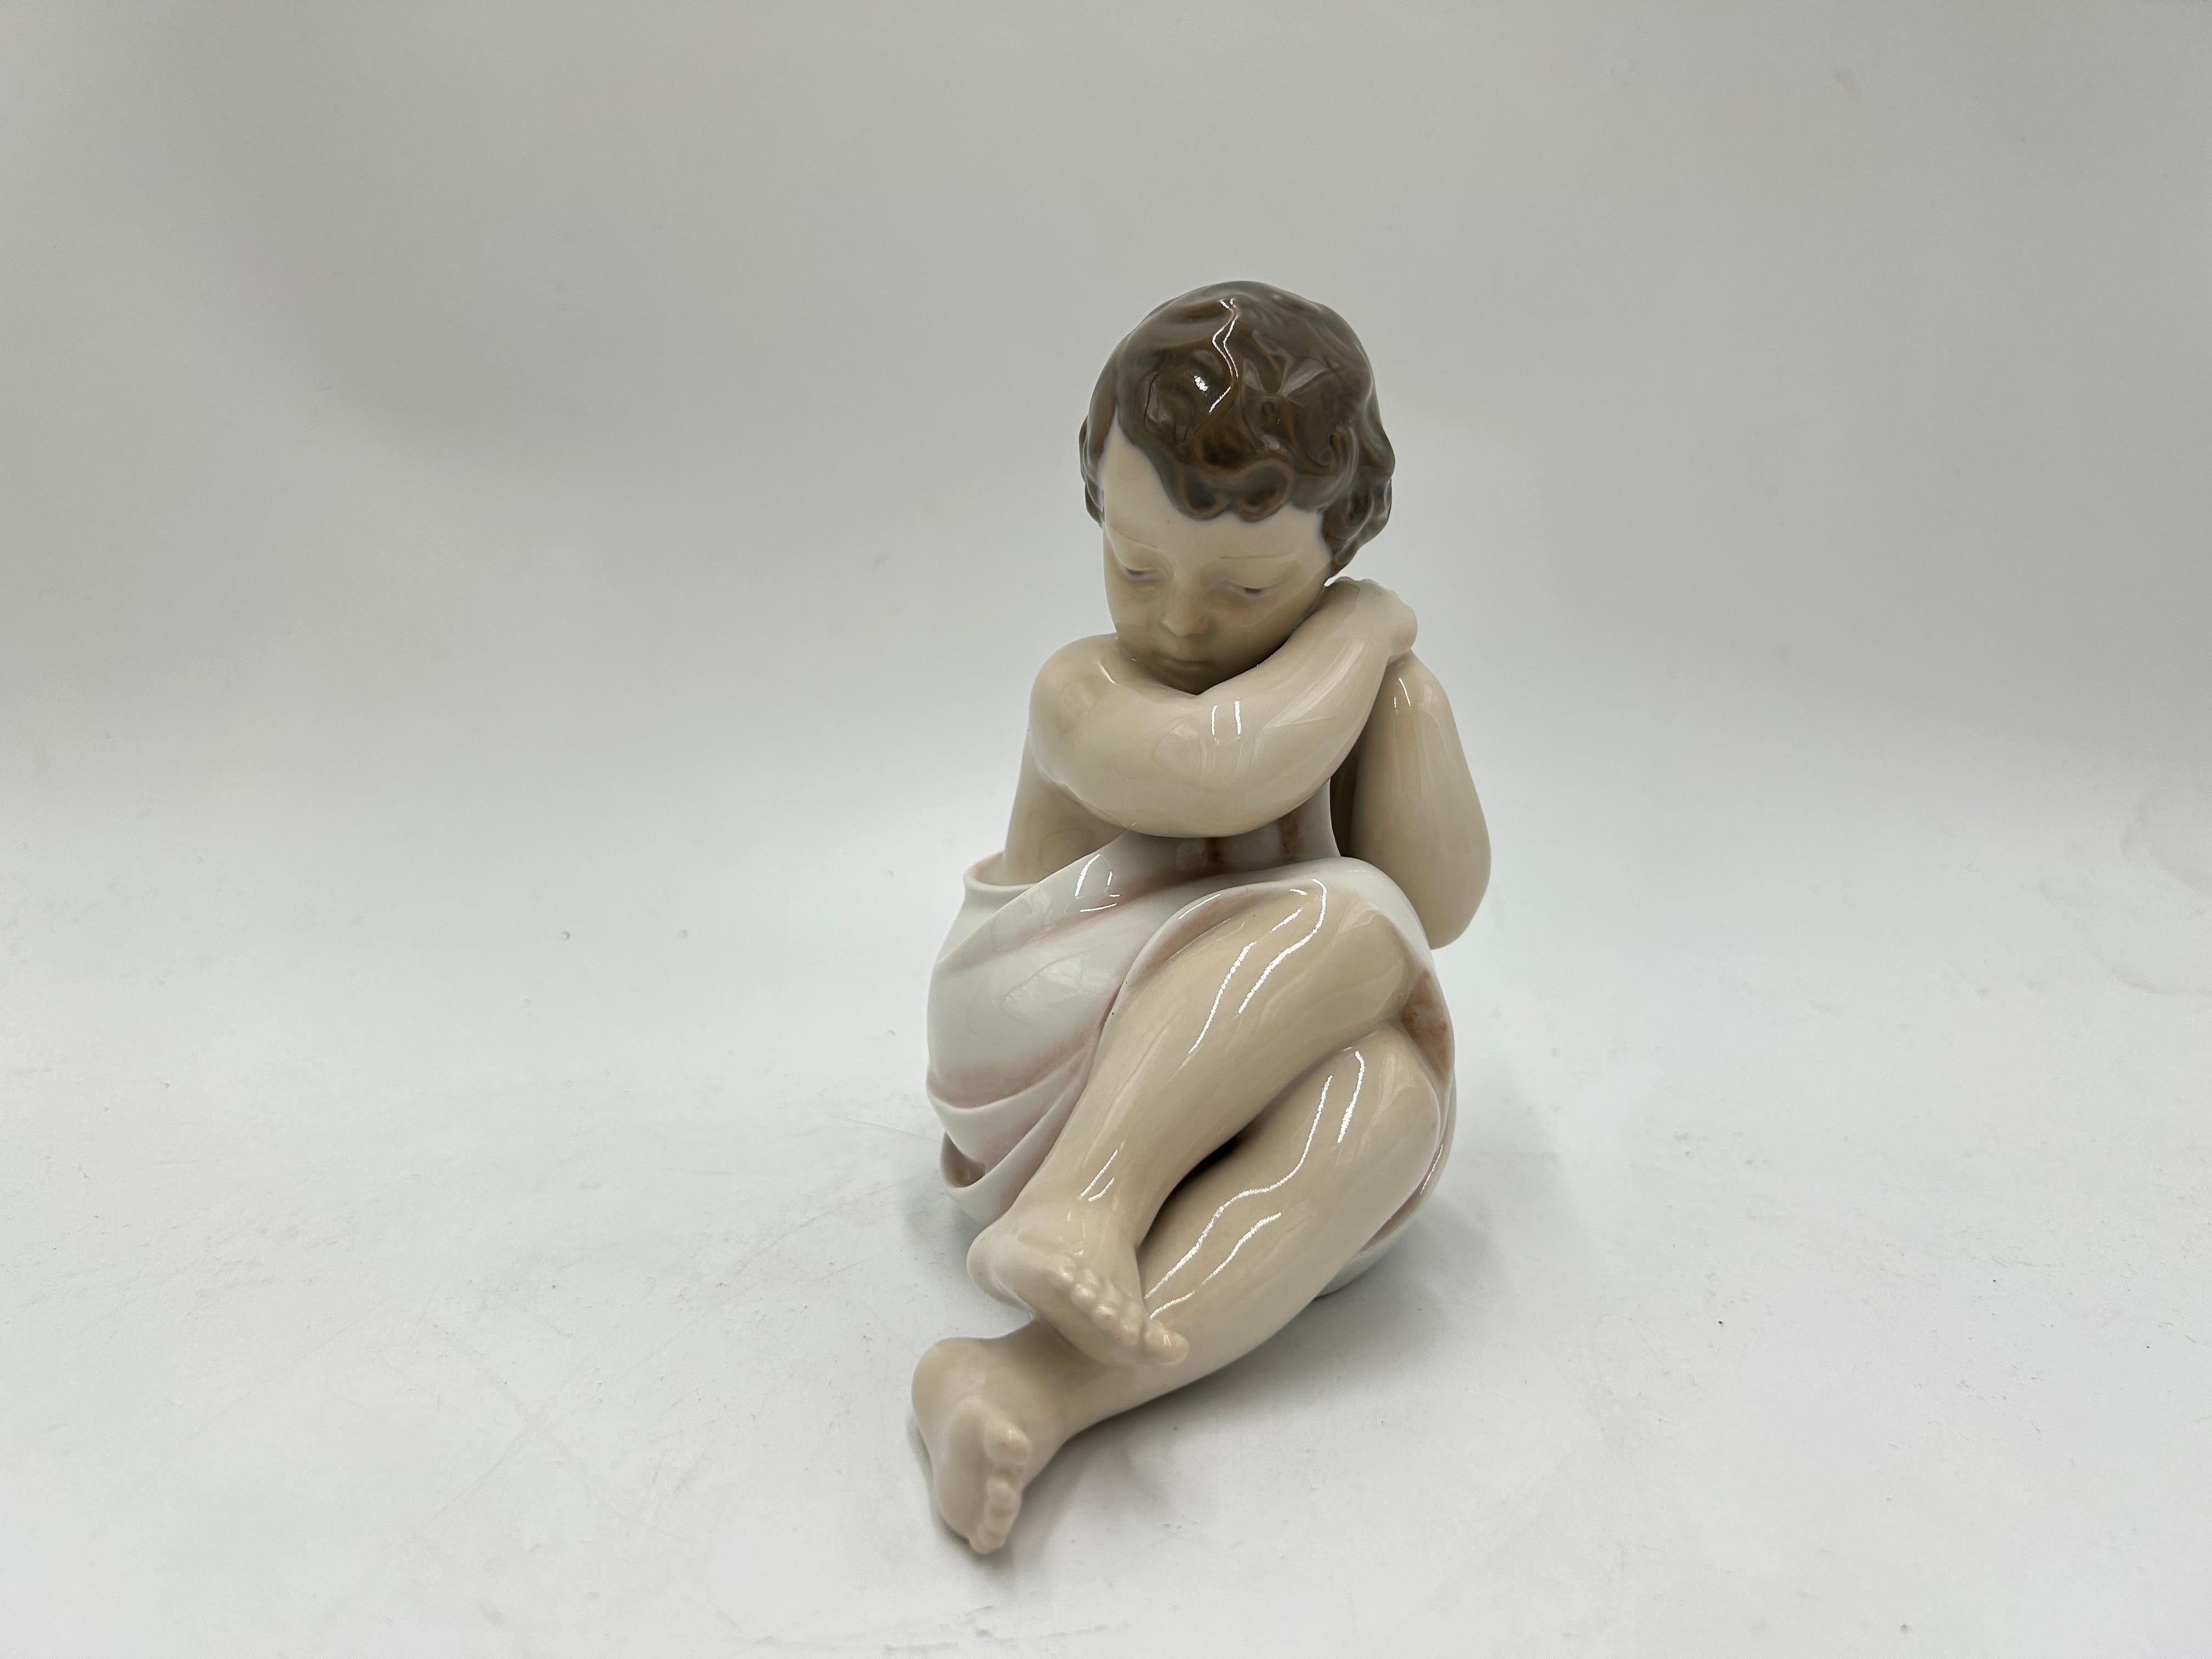 Porcelain figurine of a cuddling child model #3009
Produced by the Danish manufacture Royal Copenhagen
Mark used in 1951.
Very good condition, no damage
Measures: height: 15cm
width: 14cm
depth: 9cm.